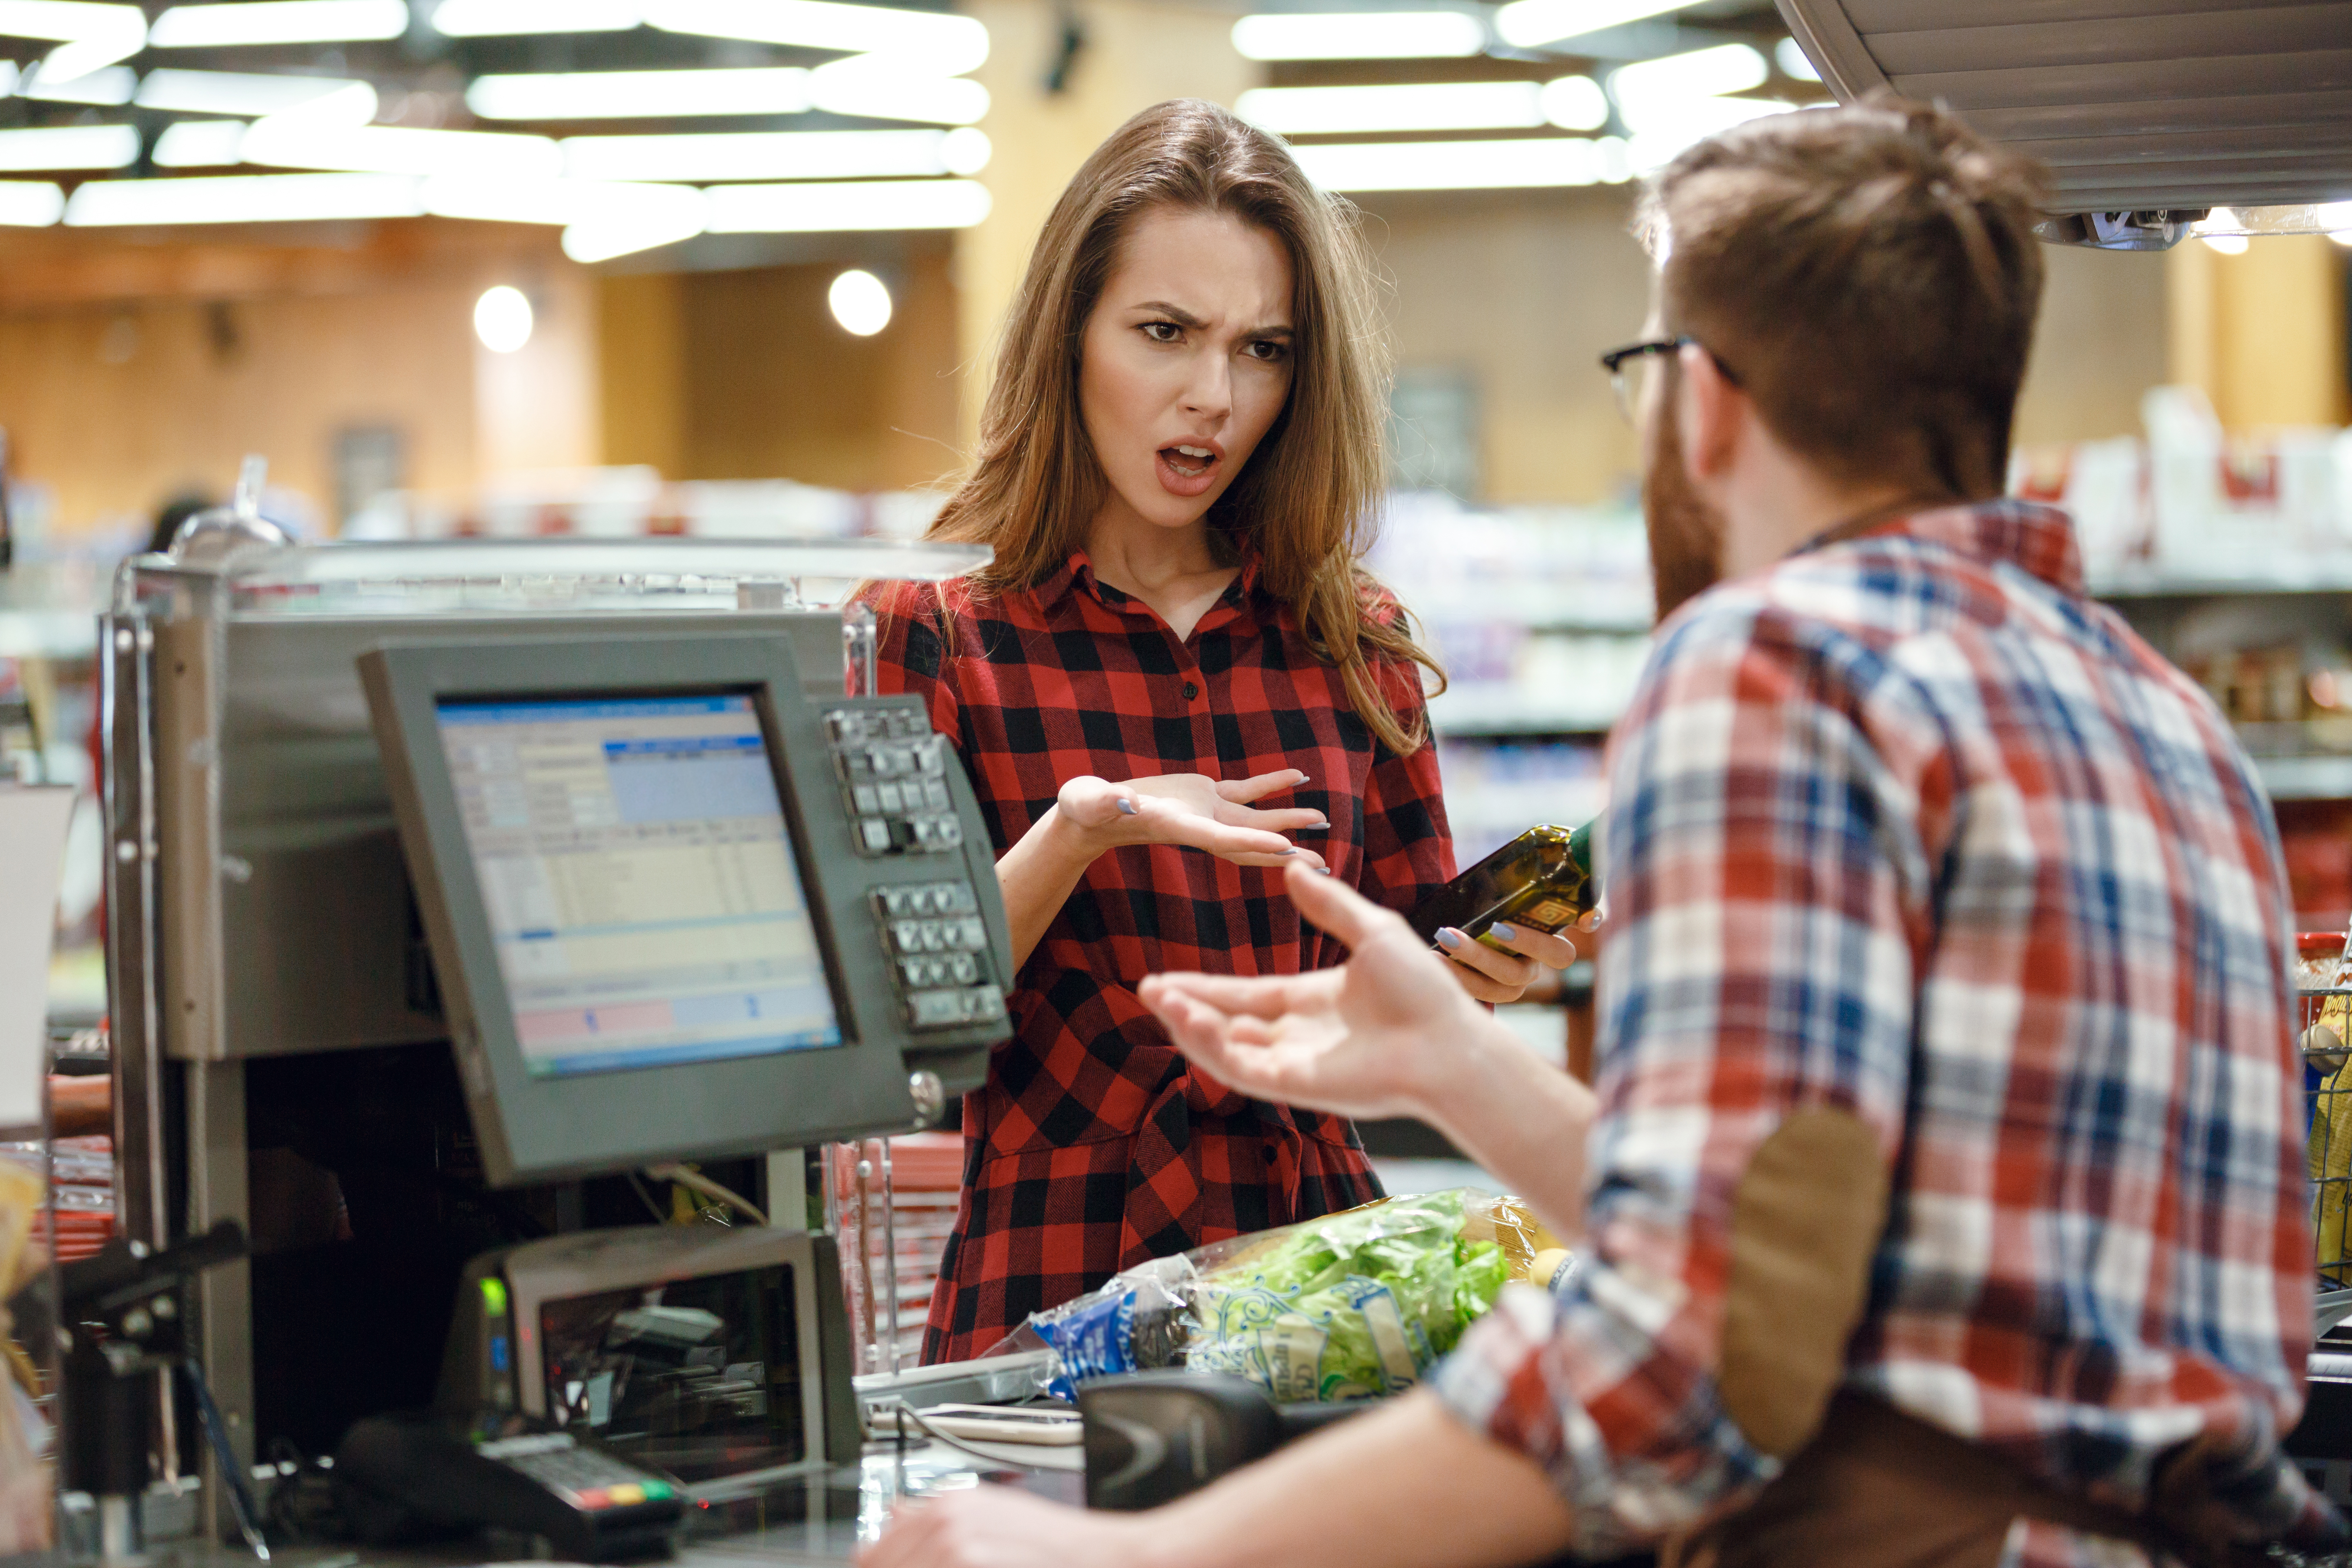 An angry female cashier attending to a male customer | Source: Shutterstock